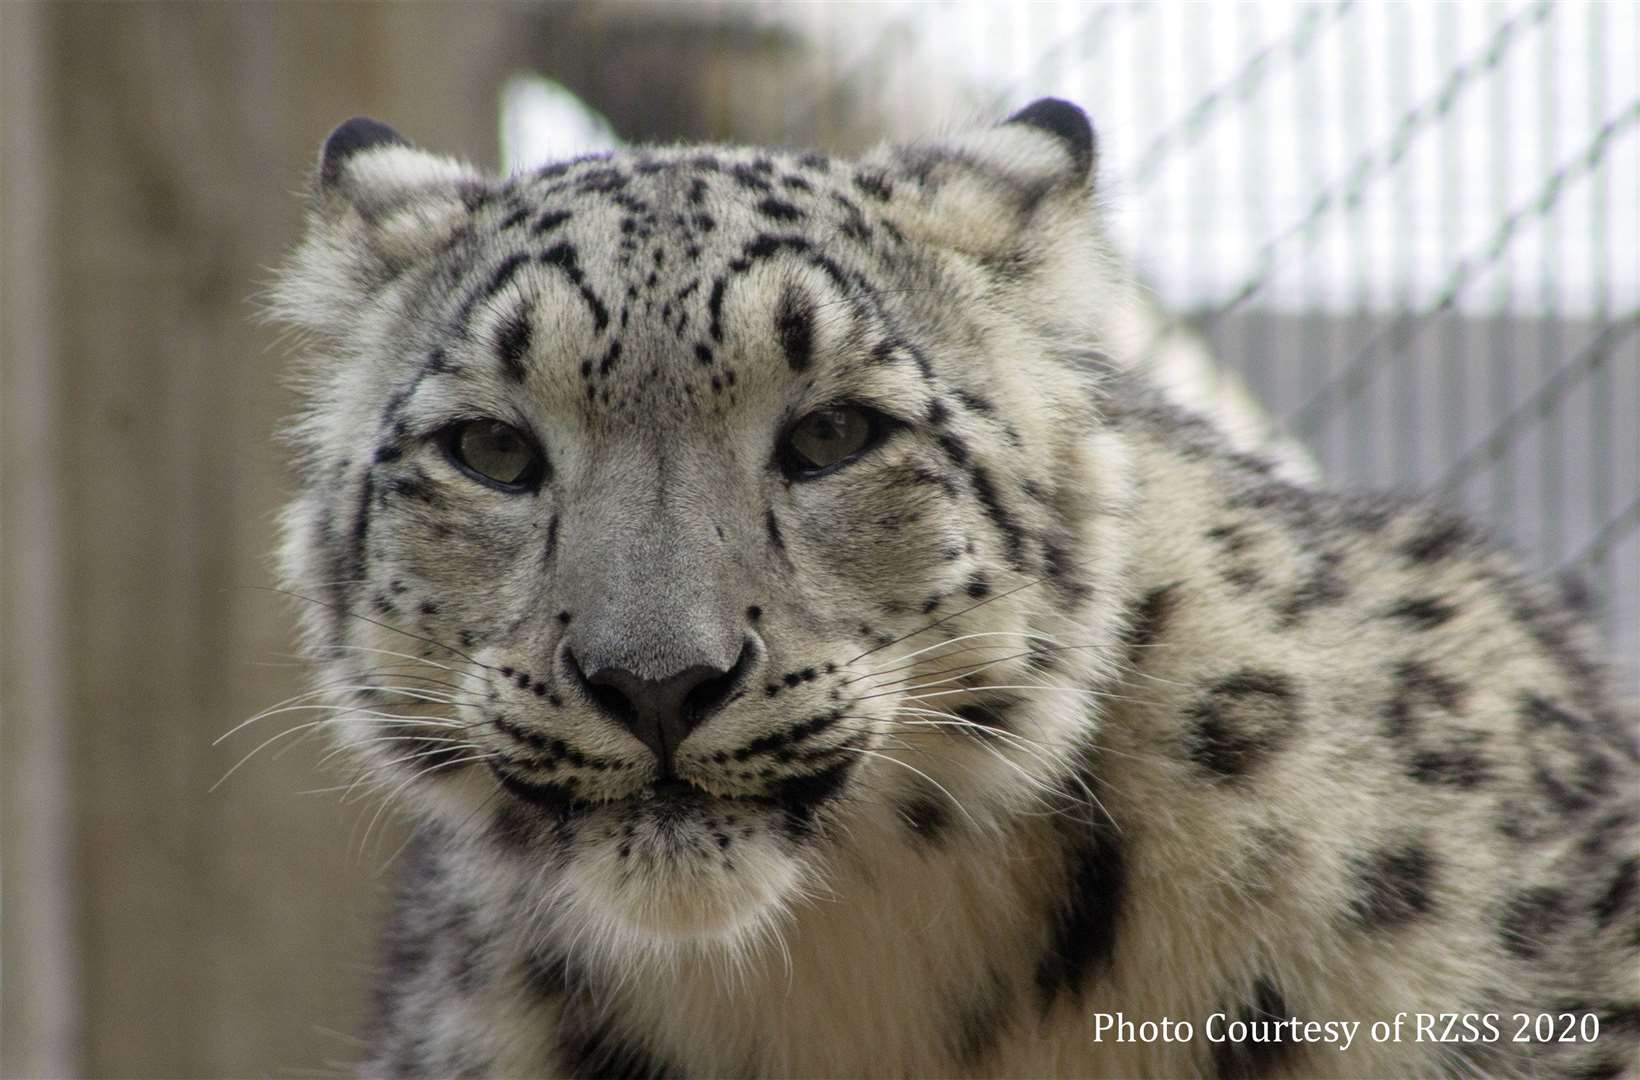 The two snow leopards will be moving to their new home near to Morpeth next month.